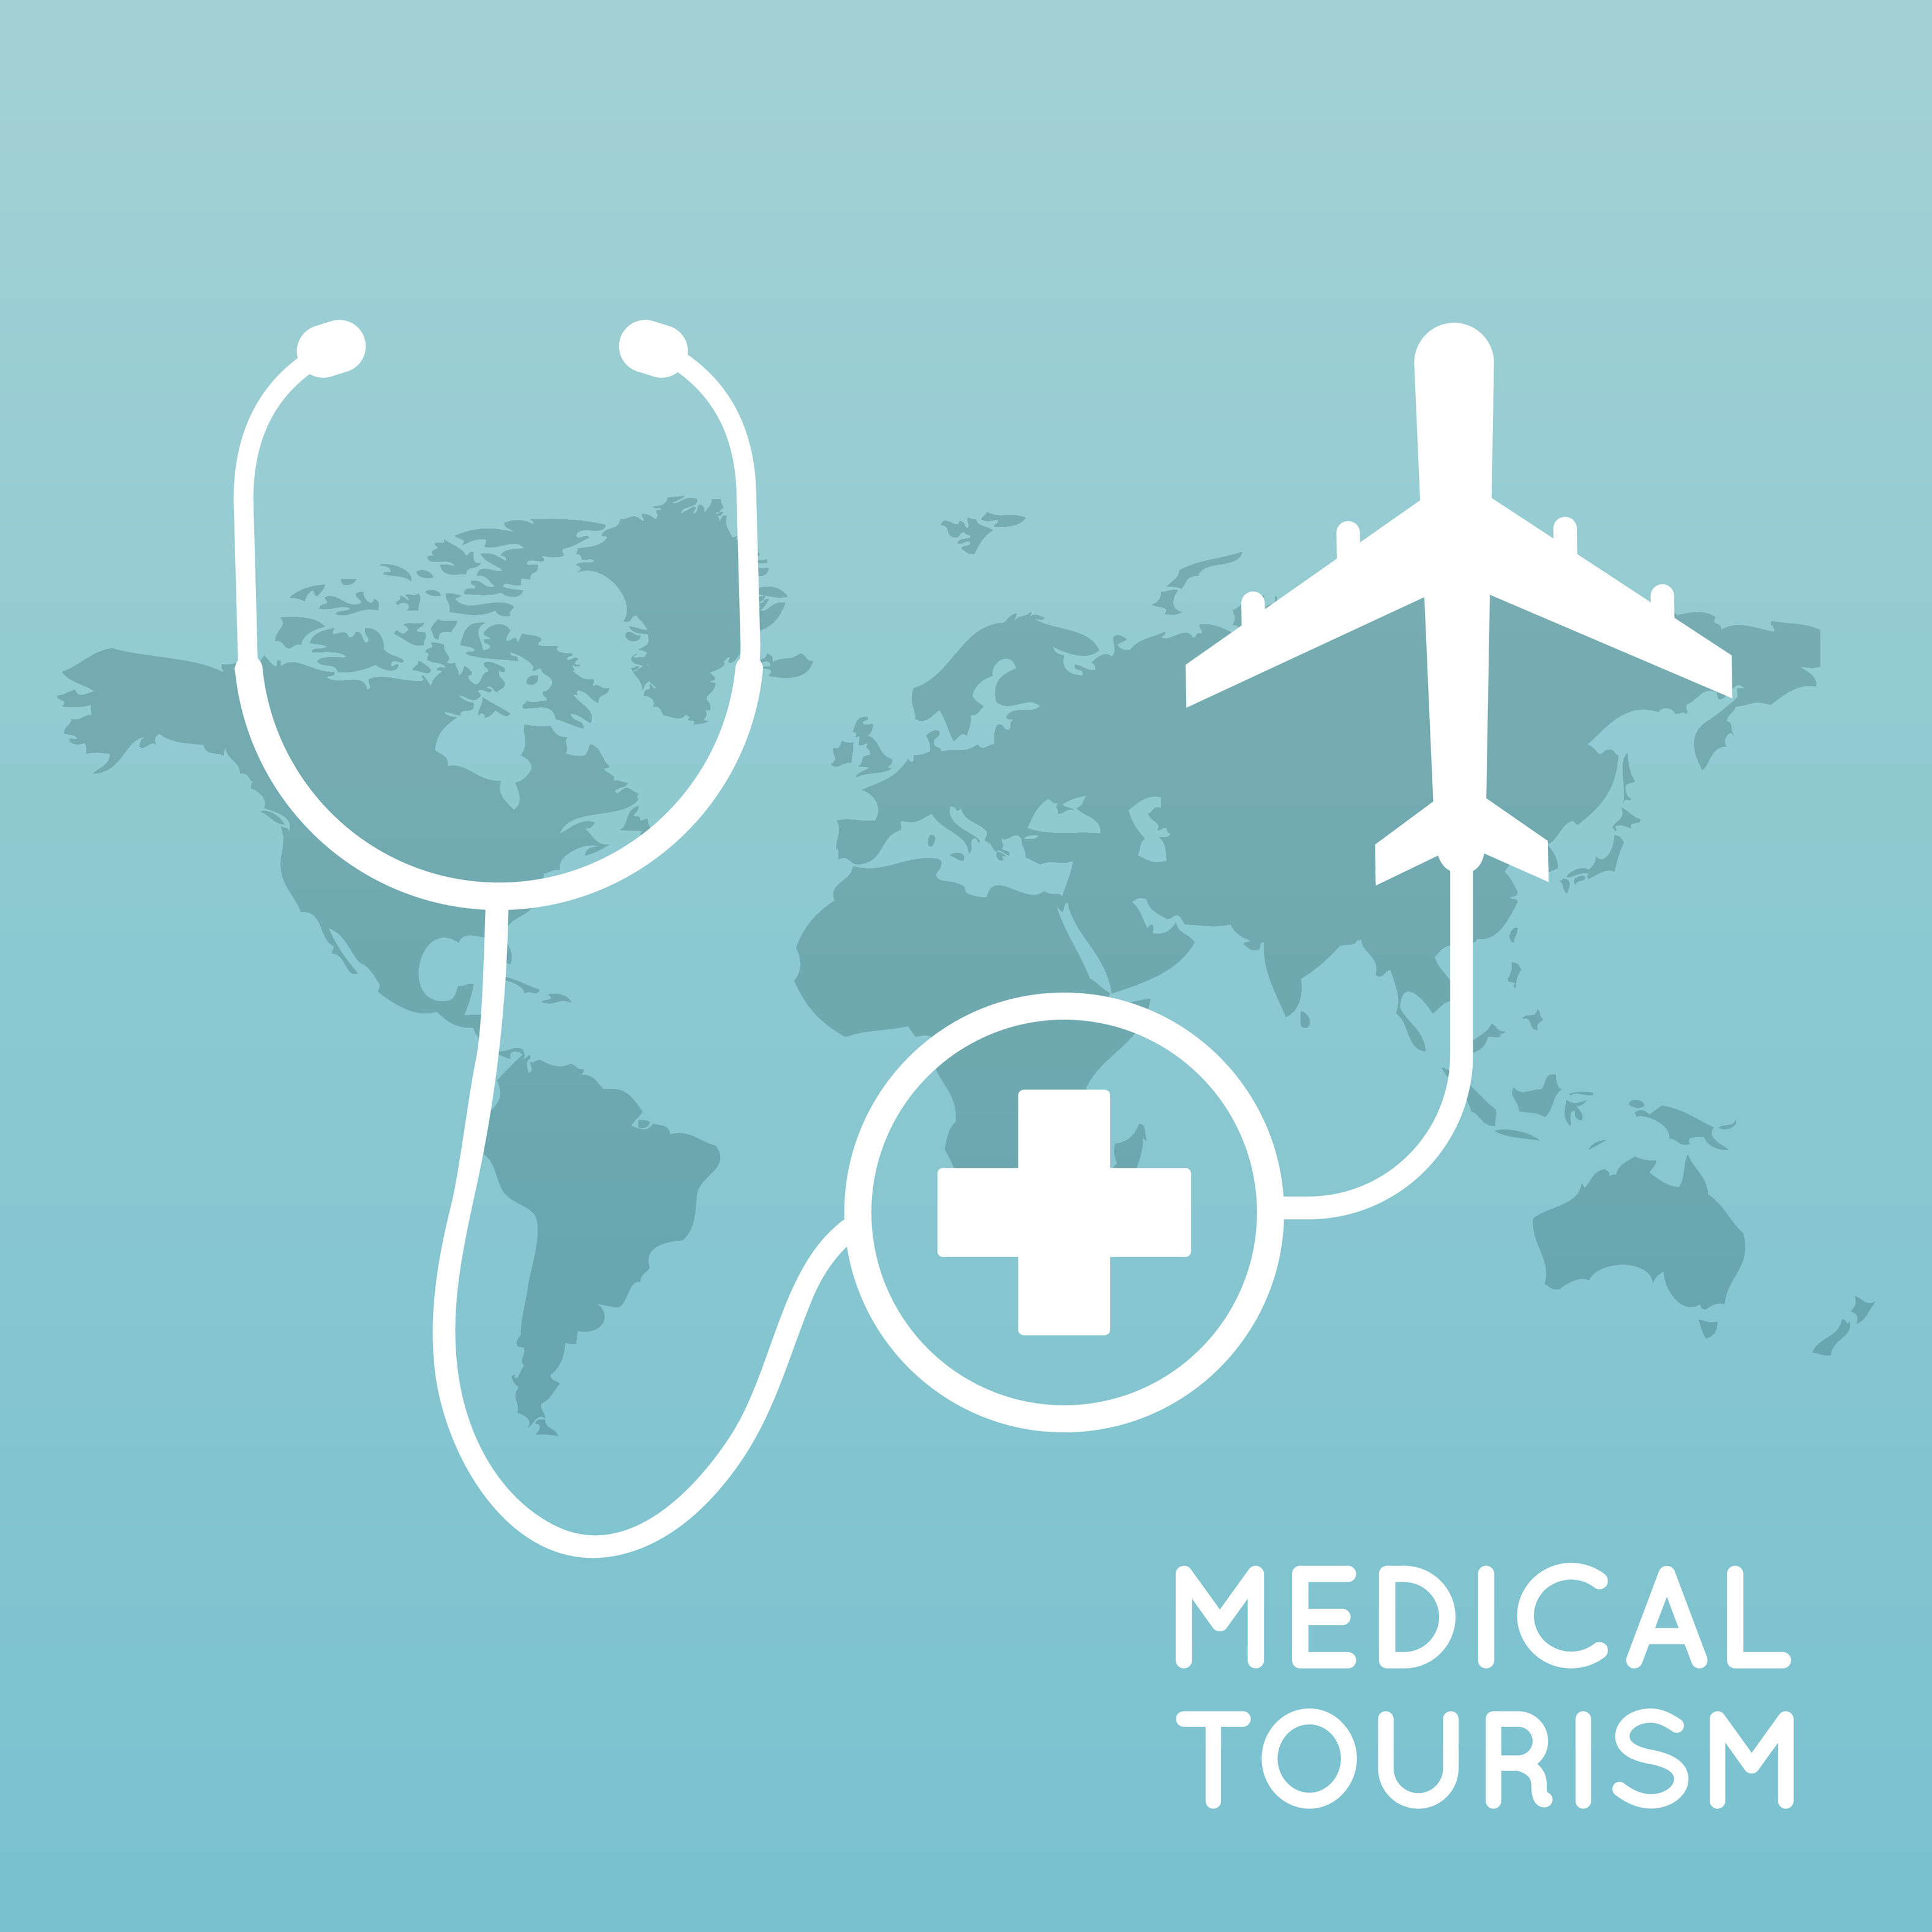 poster of medical tourism